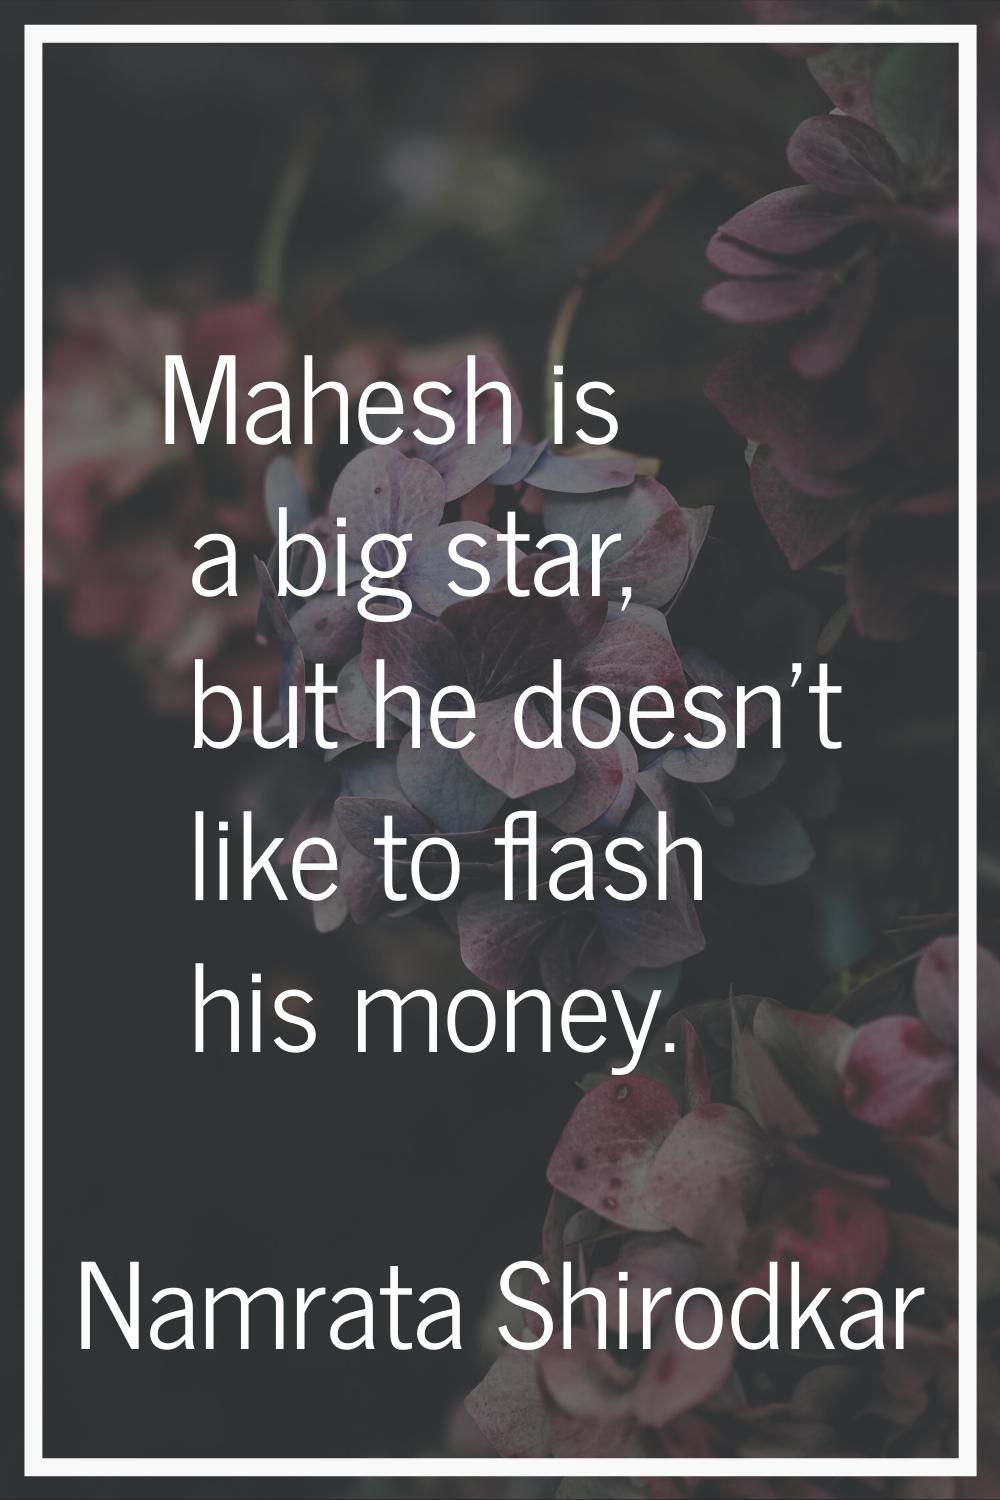 Mahesh is a big star, but he doesn't like to flash his money.